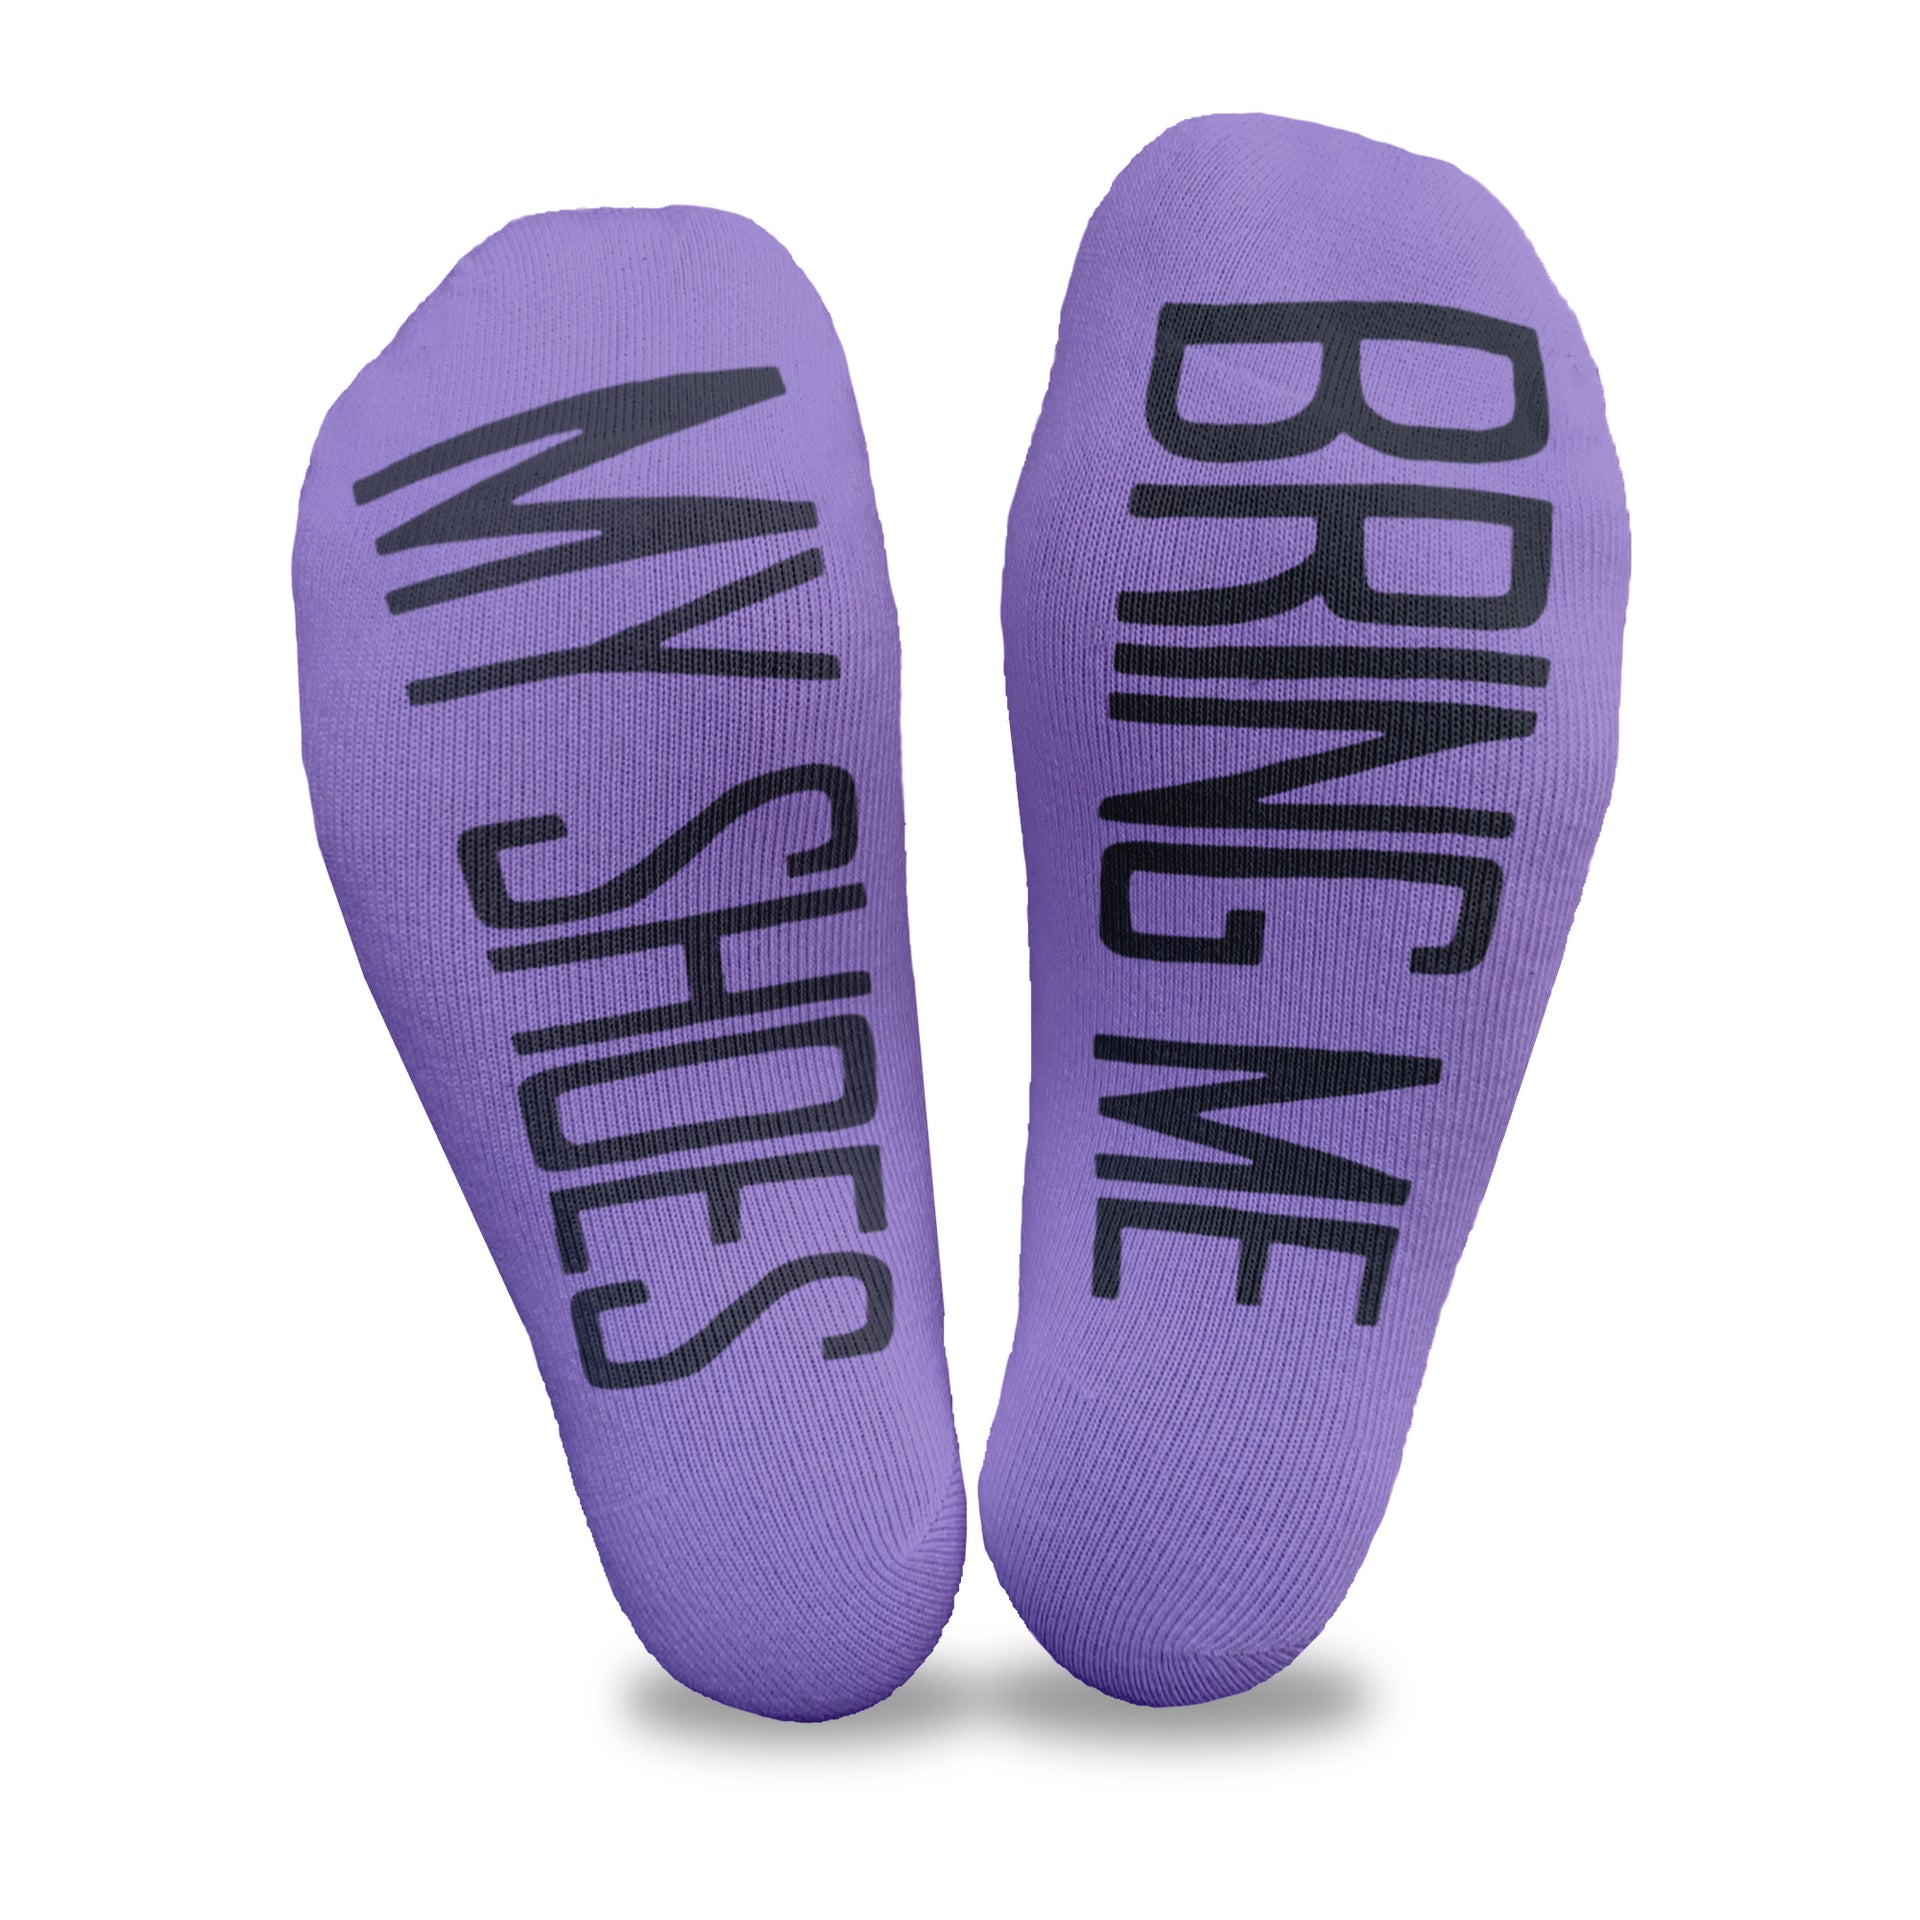 Bring me my shoes custom printed on the bottoms of purple cotton no show socks is a great way to get your shoes!